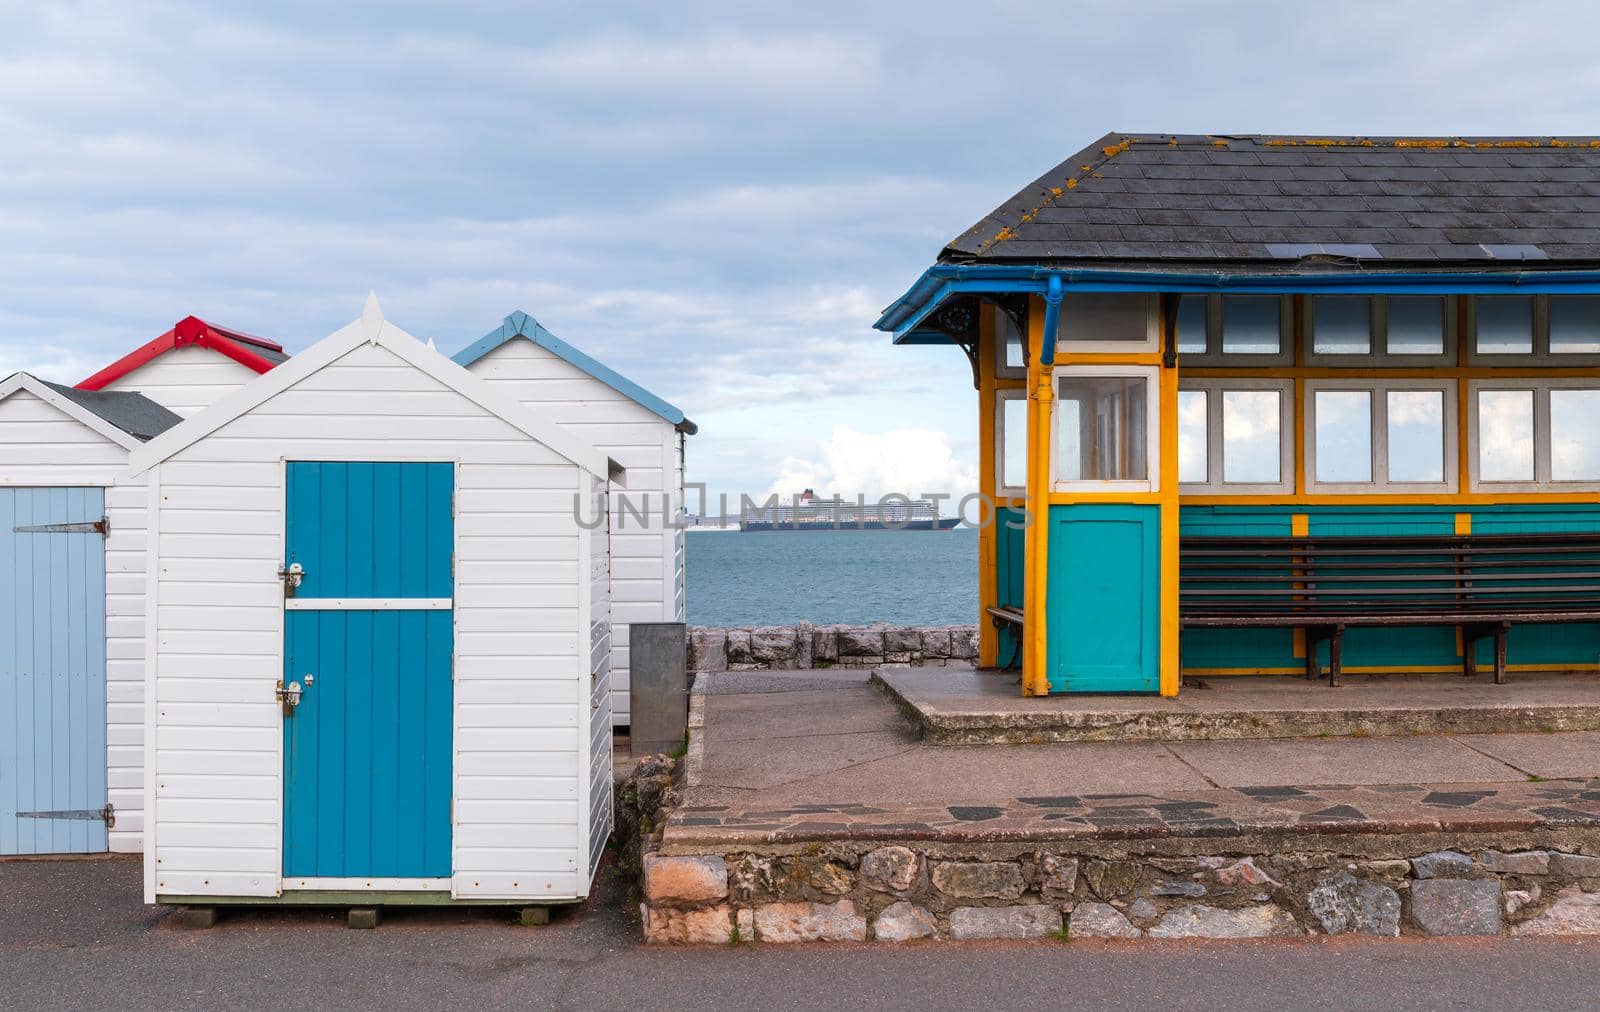 Colorful small beach houses. Multicolored beach sheds. Variety of painted beach shacks. Cruise ship on water in background. Beach huts. Torbay, South Devon. UK. by Qba